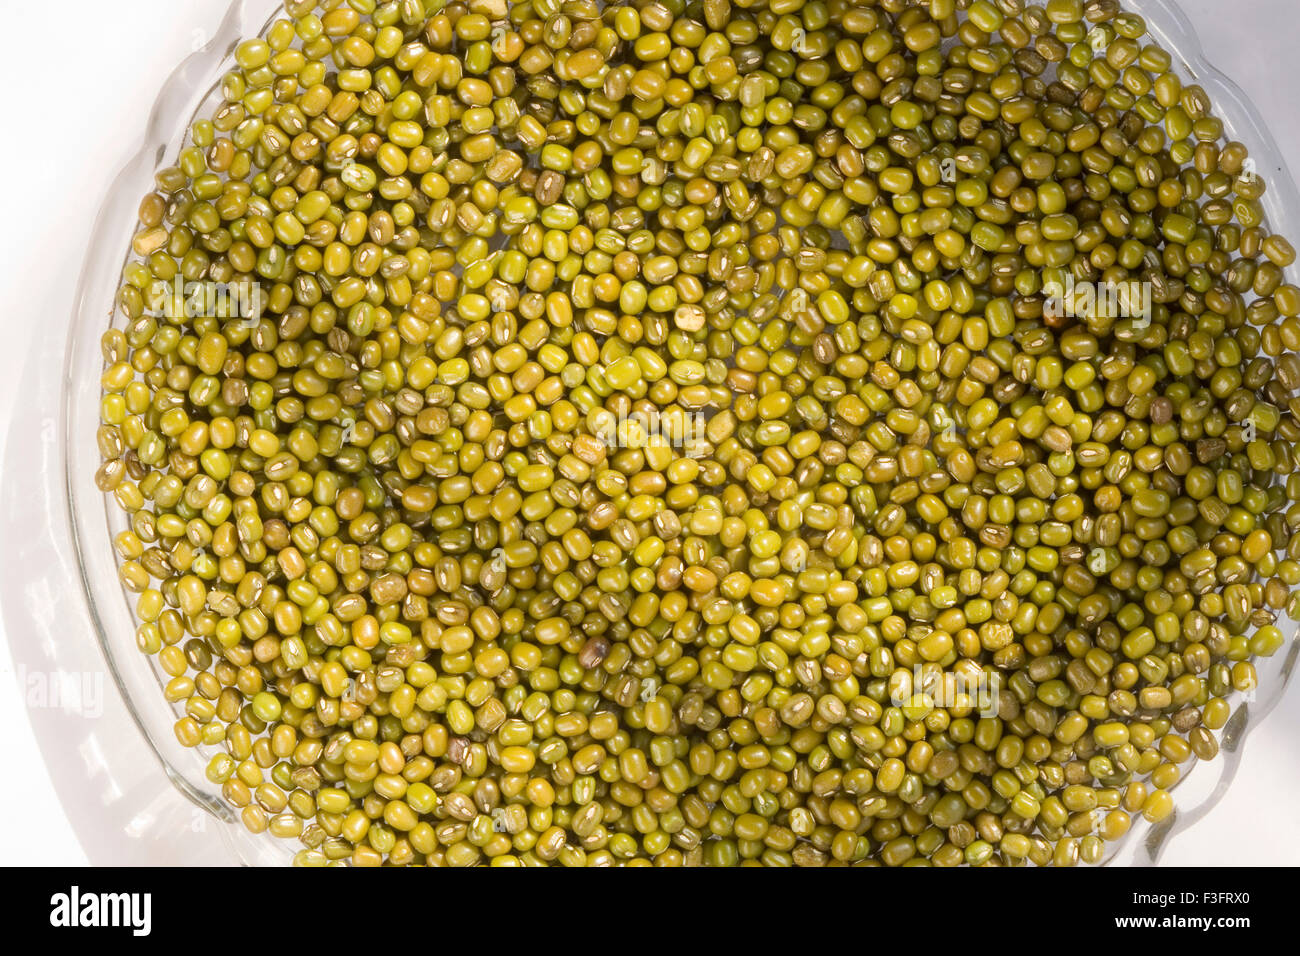 Moong dal pea or tuar in bowls on white background Stock Photo